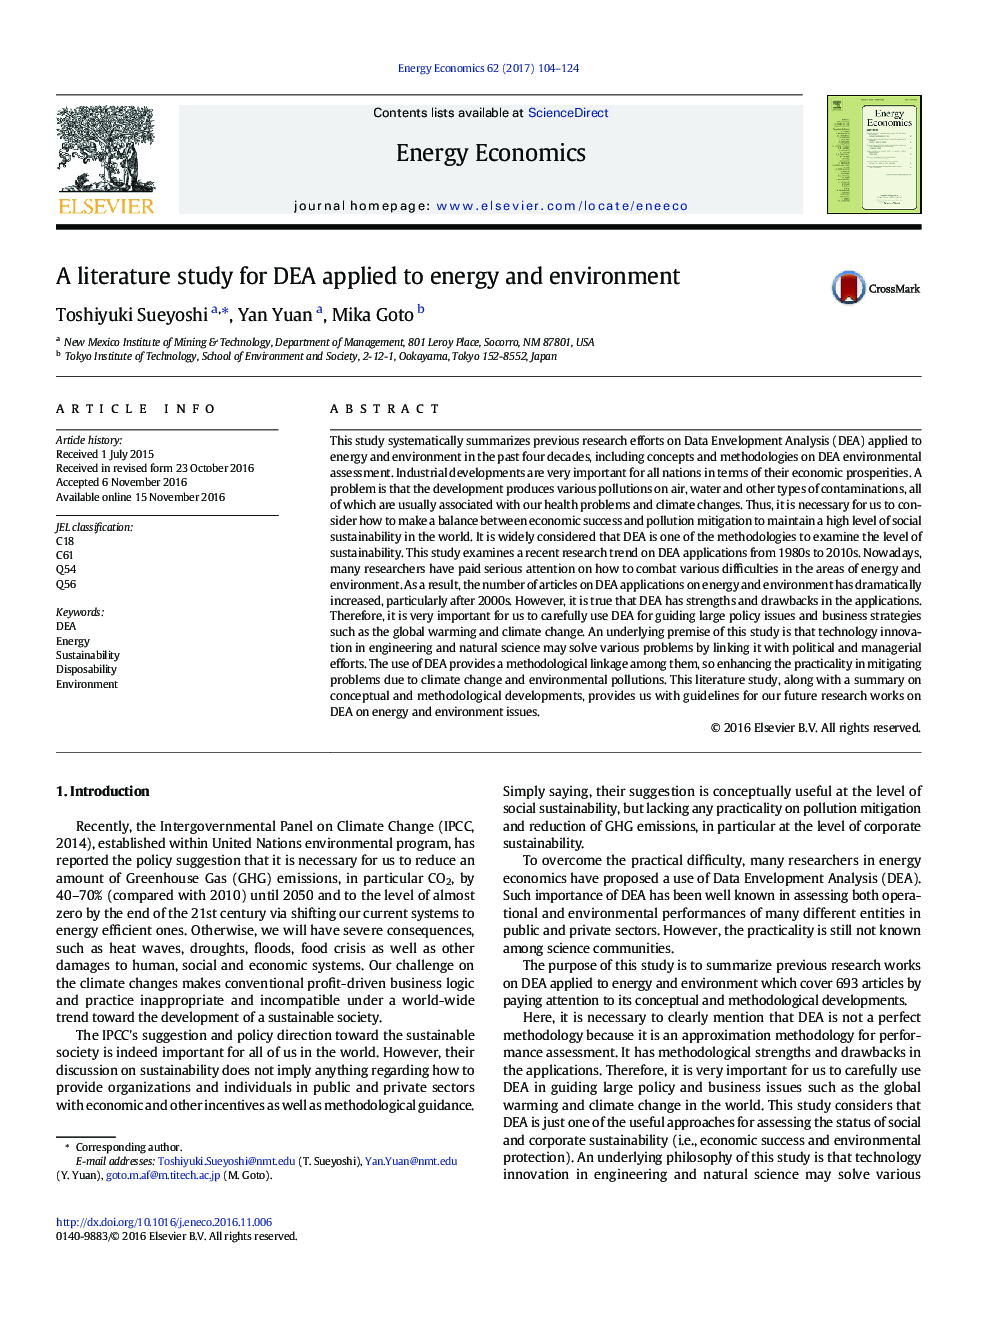 A literature study for DEA applied to energy and environment